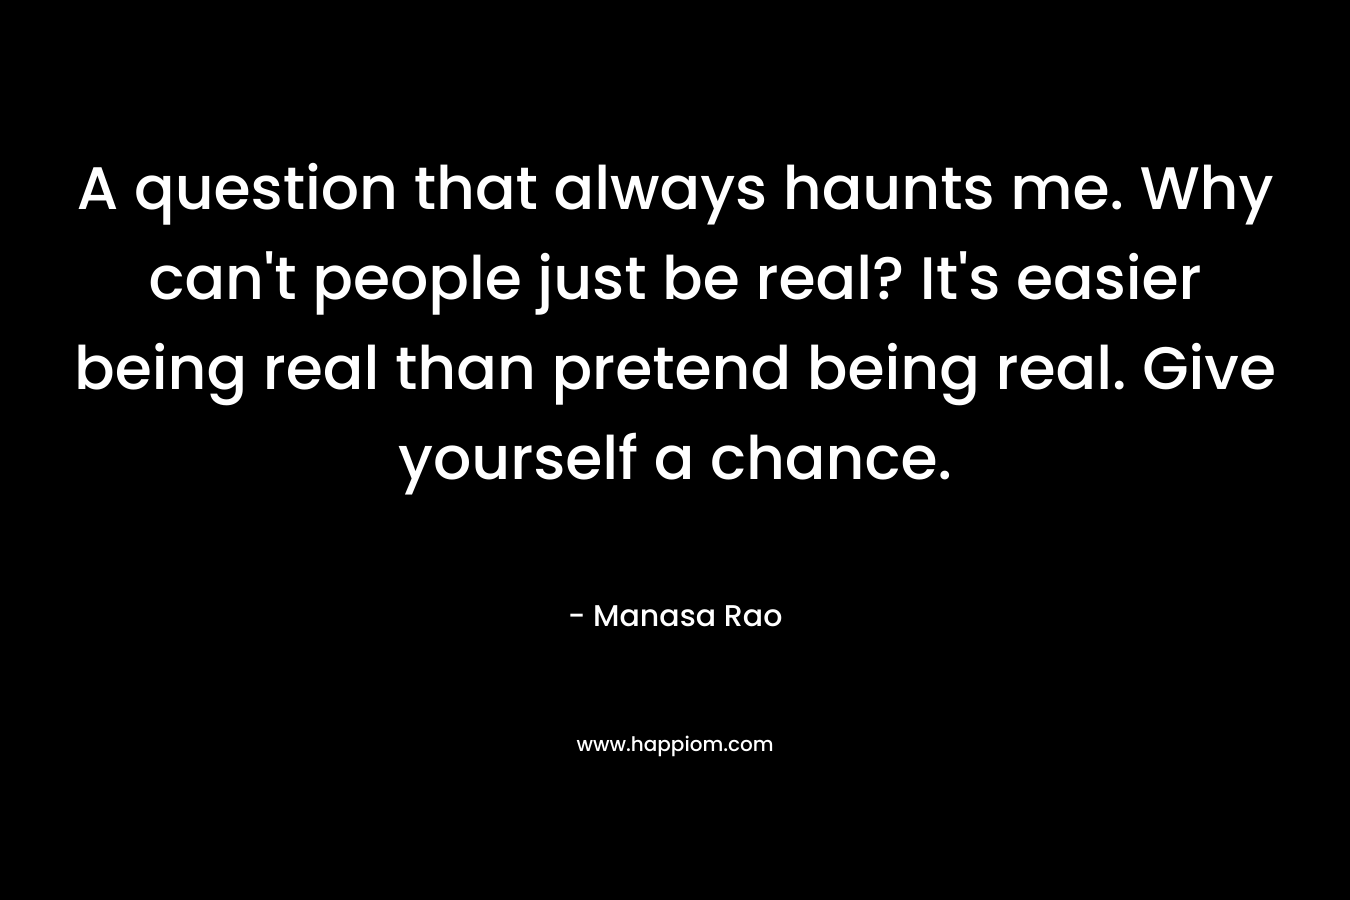 A question that always haunts me. Why can't people just be real? It's easier being real than pretend being real. Give yourself a chance.